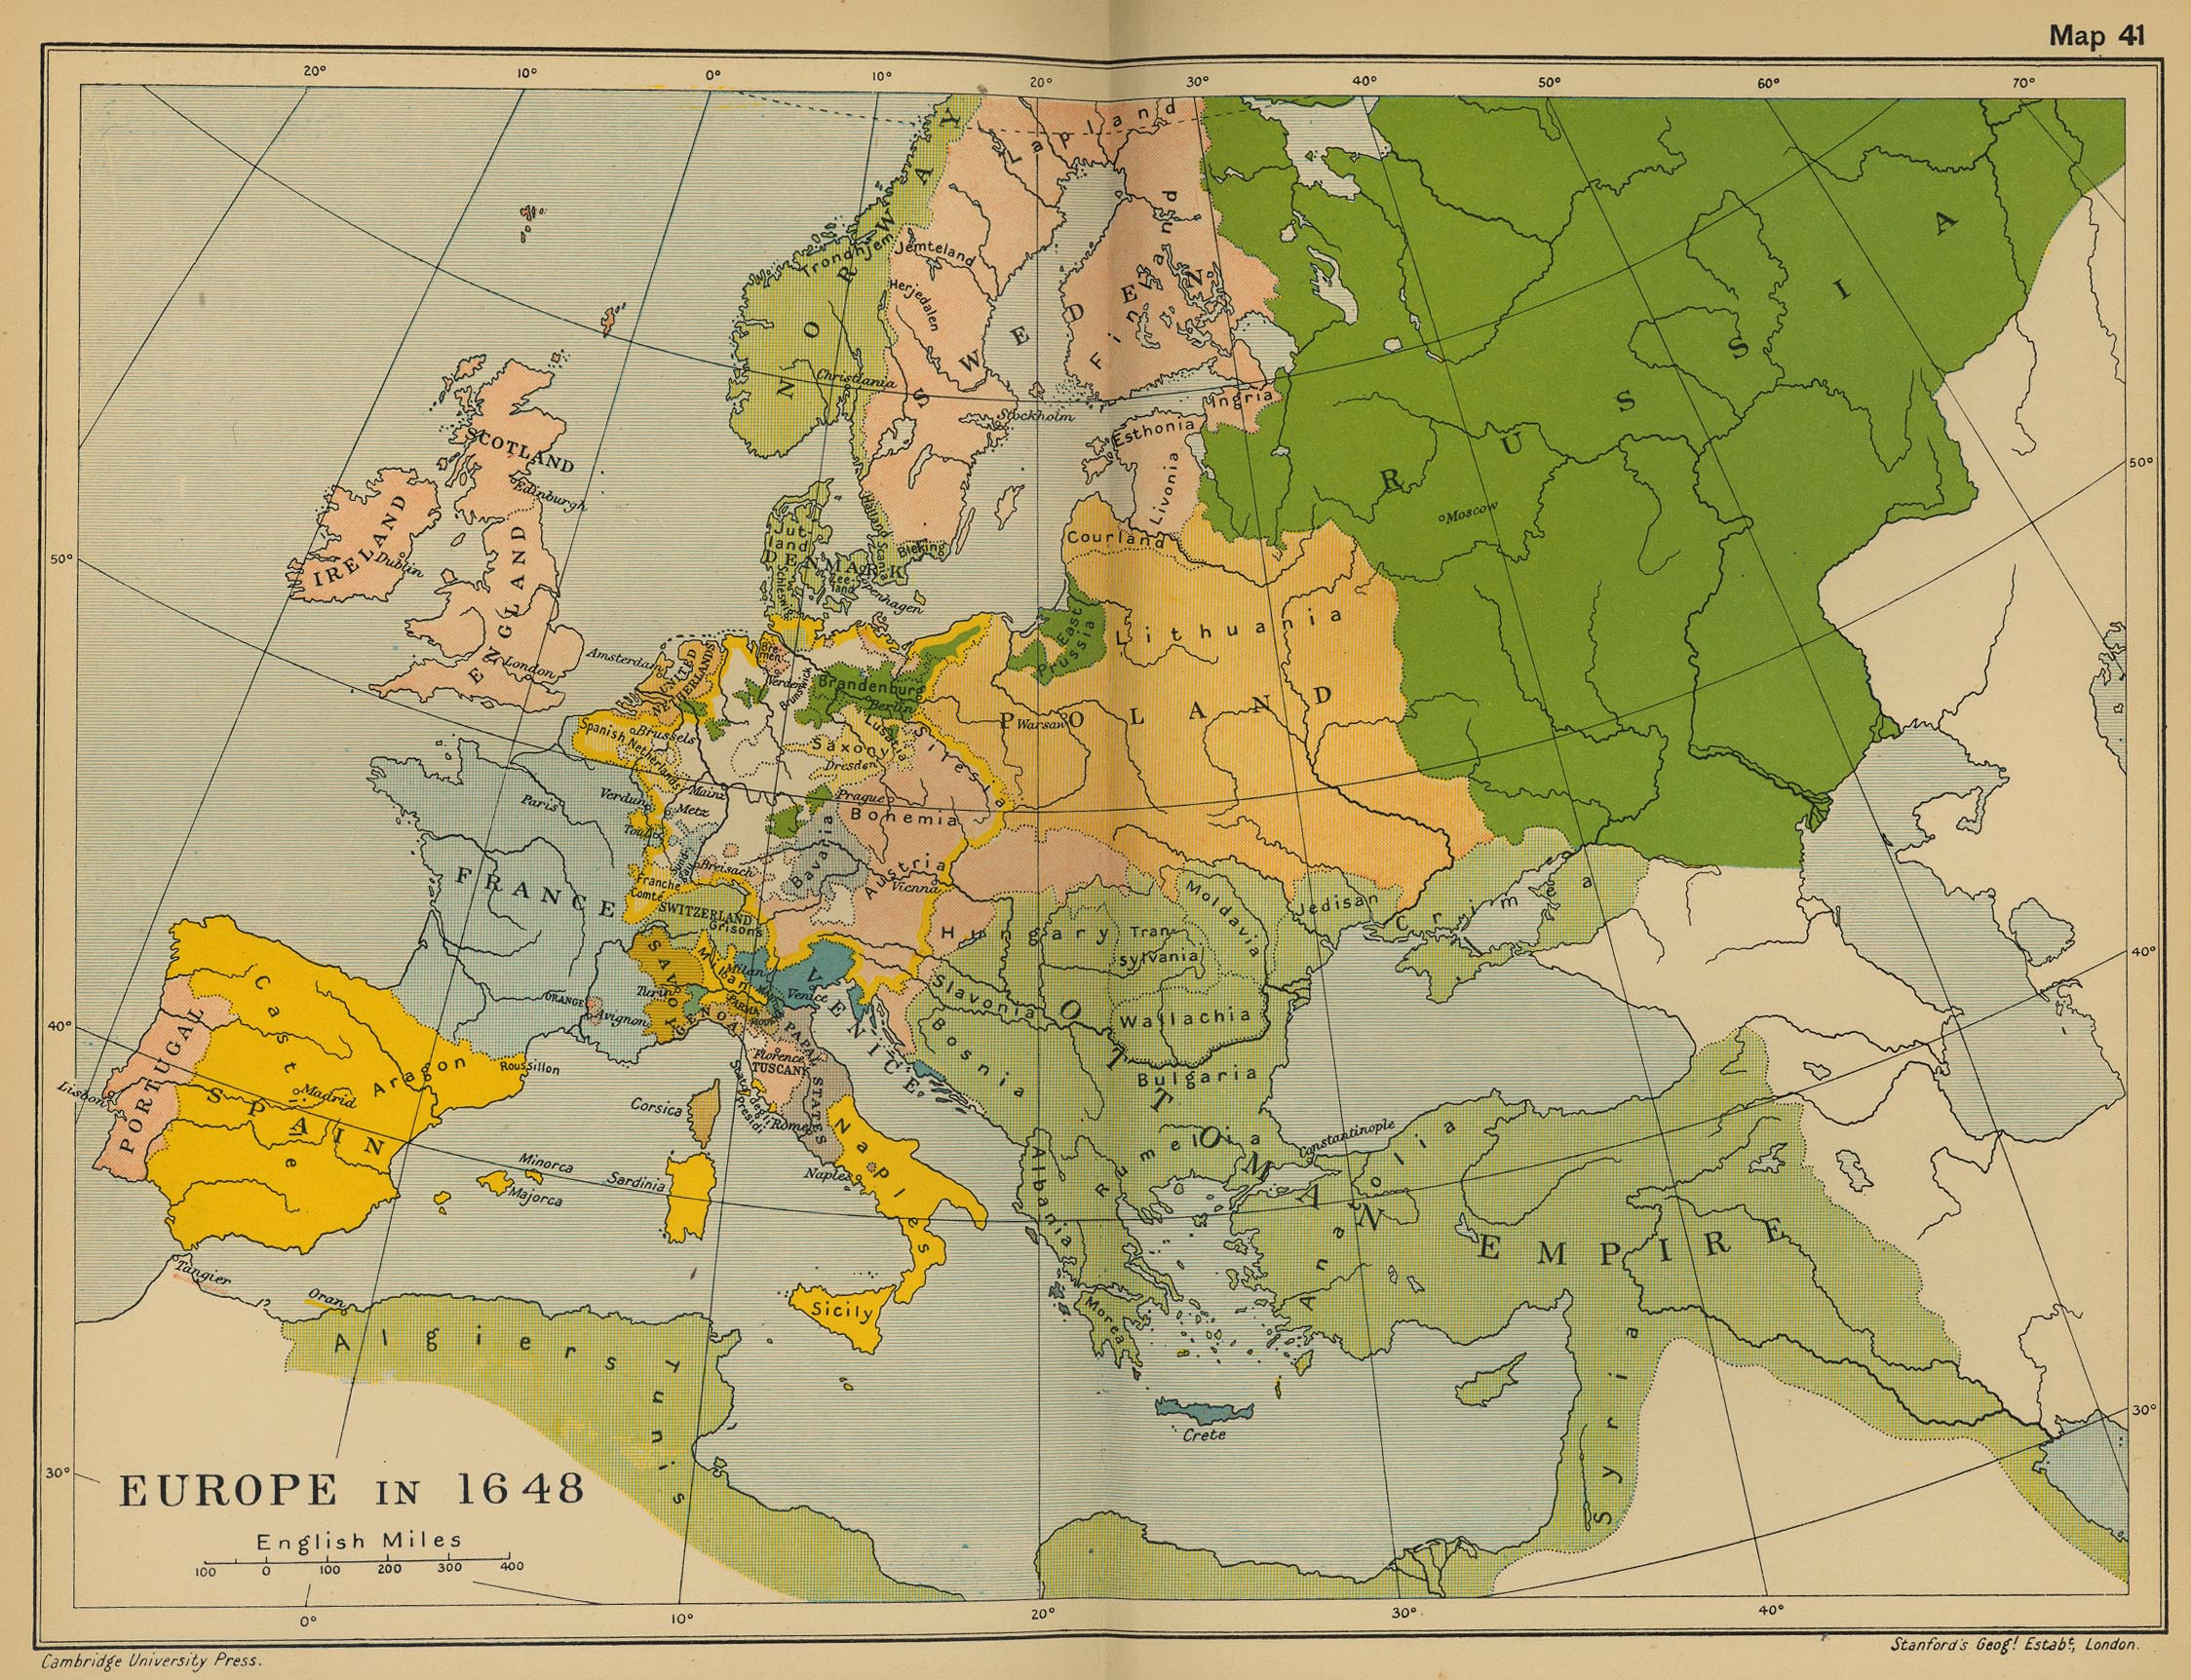 Map of Europe in 1648